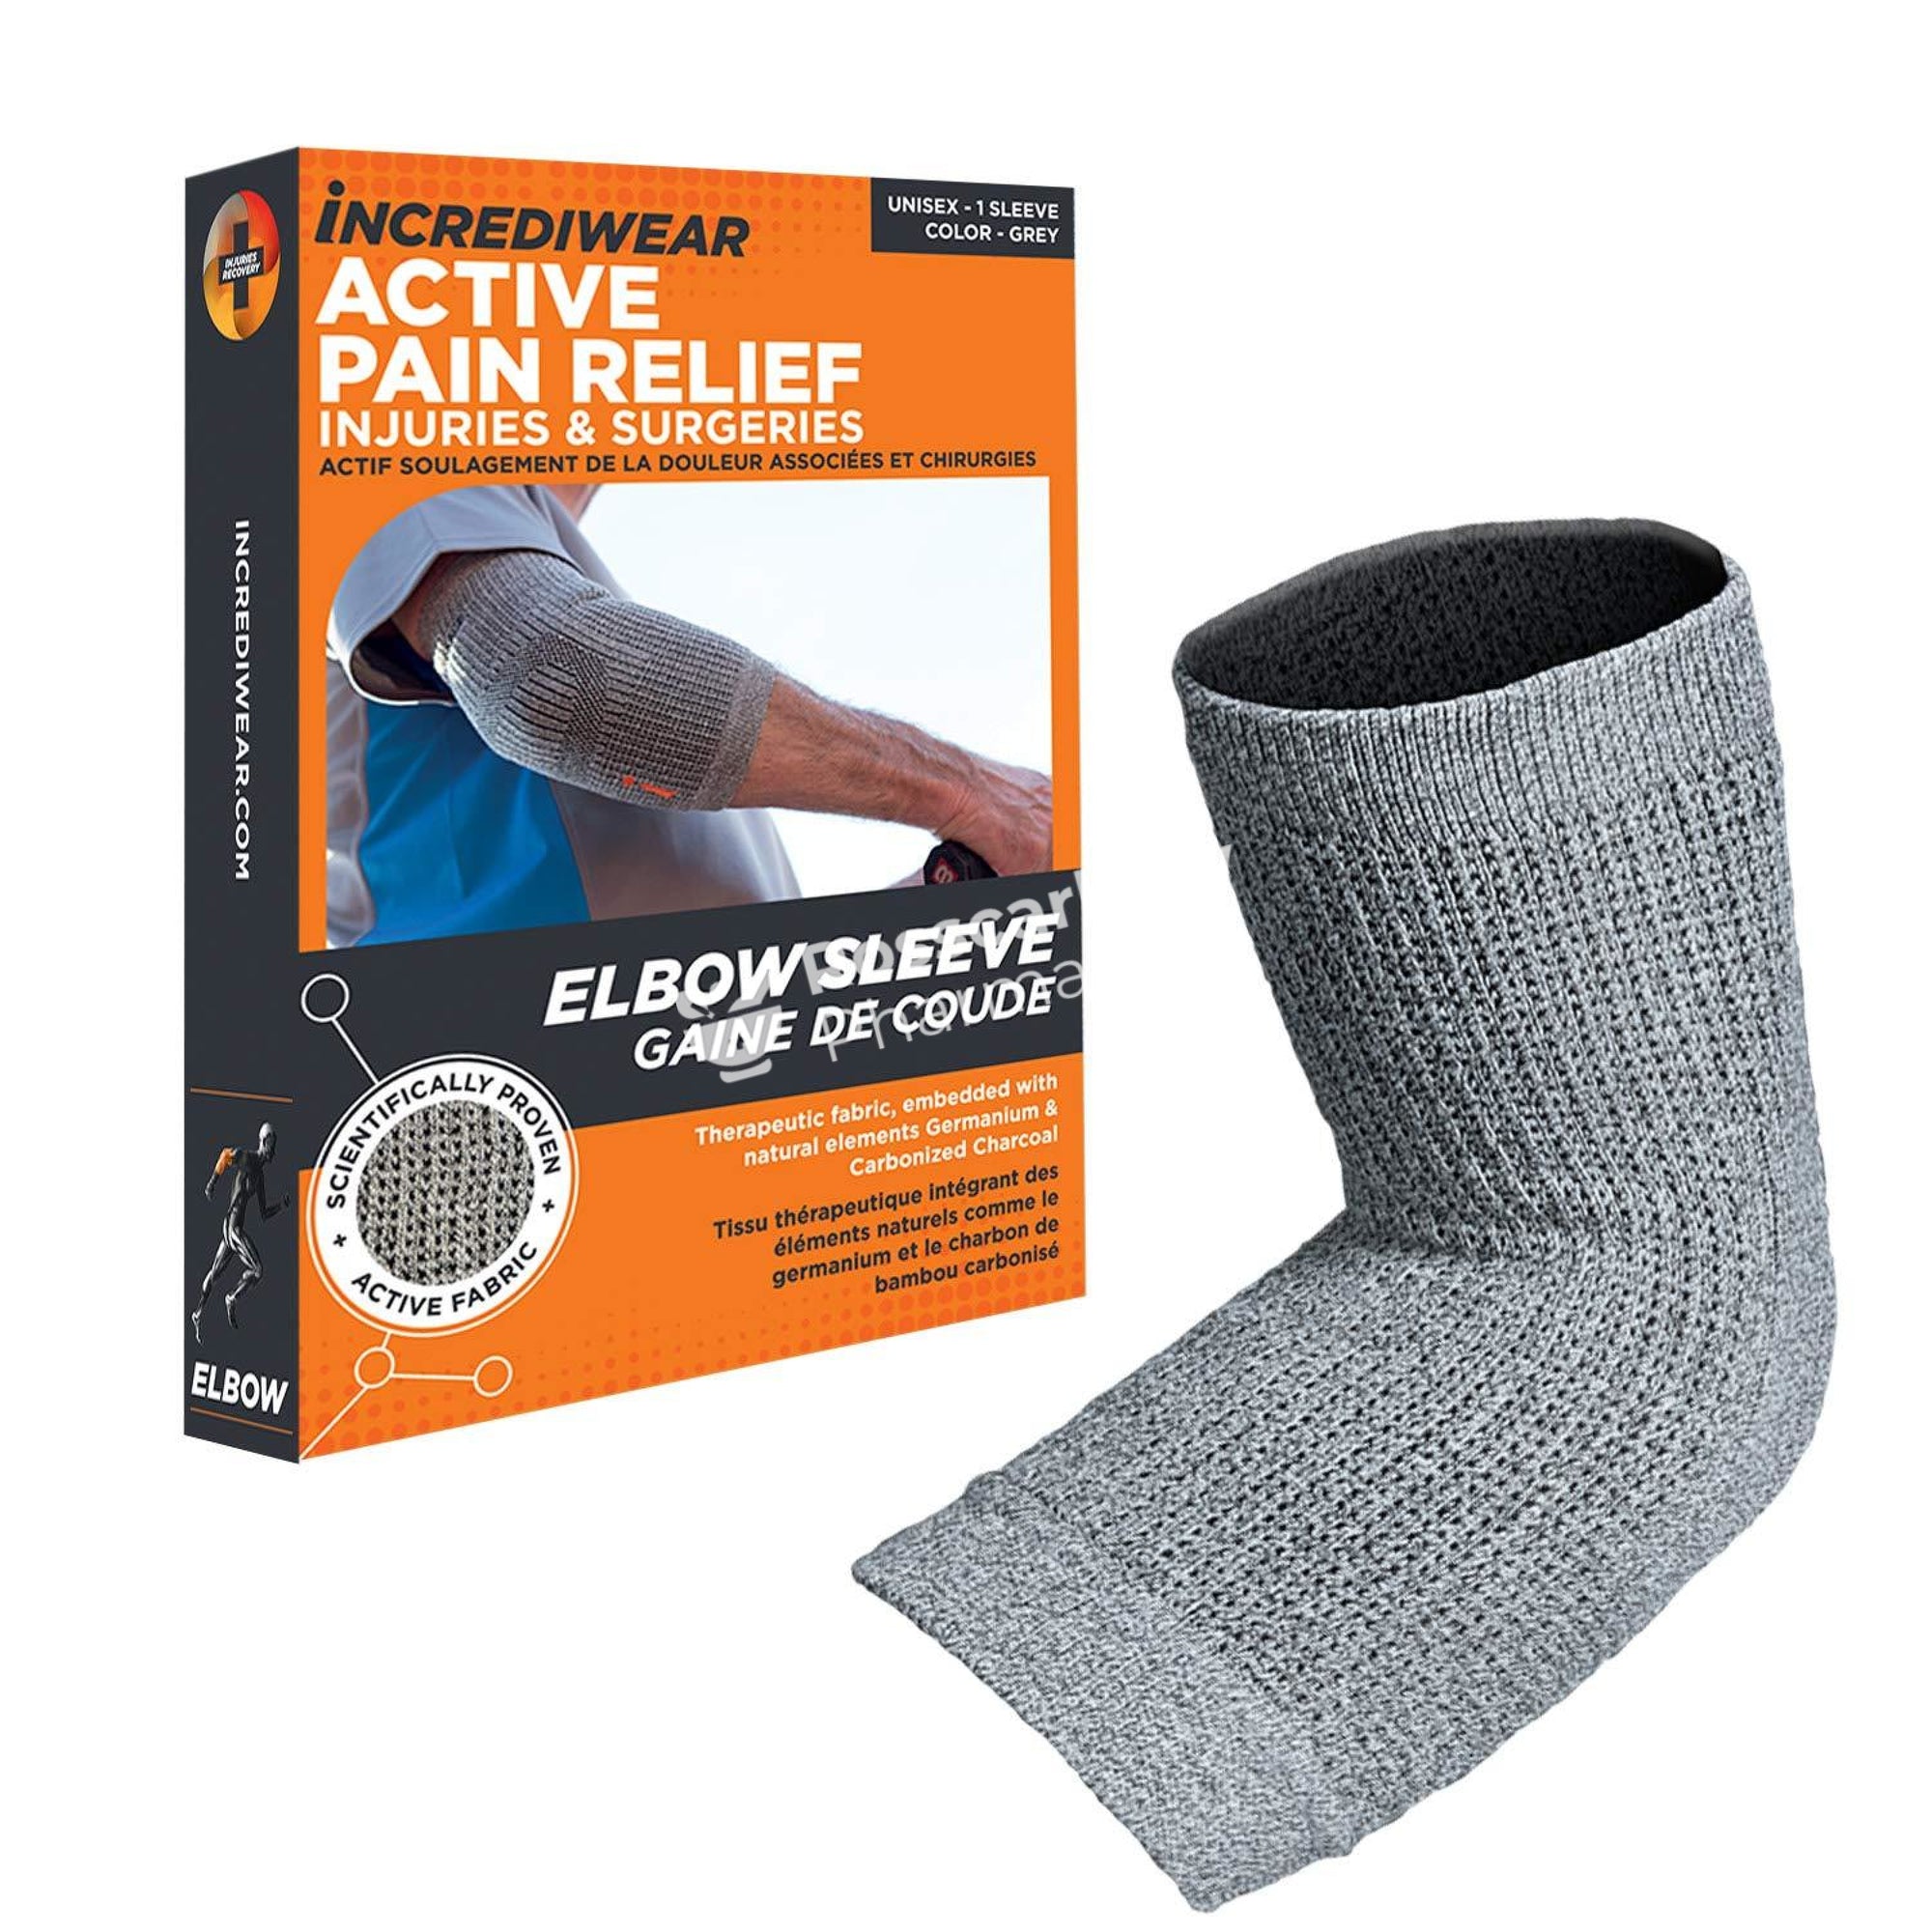 Incrediwear Active Pain Relief Elbow Sleeve - Grey Supports & Compression Hoisery